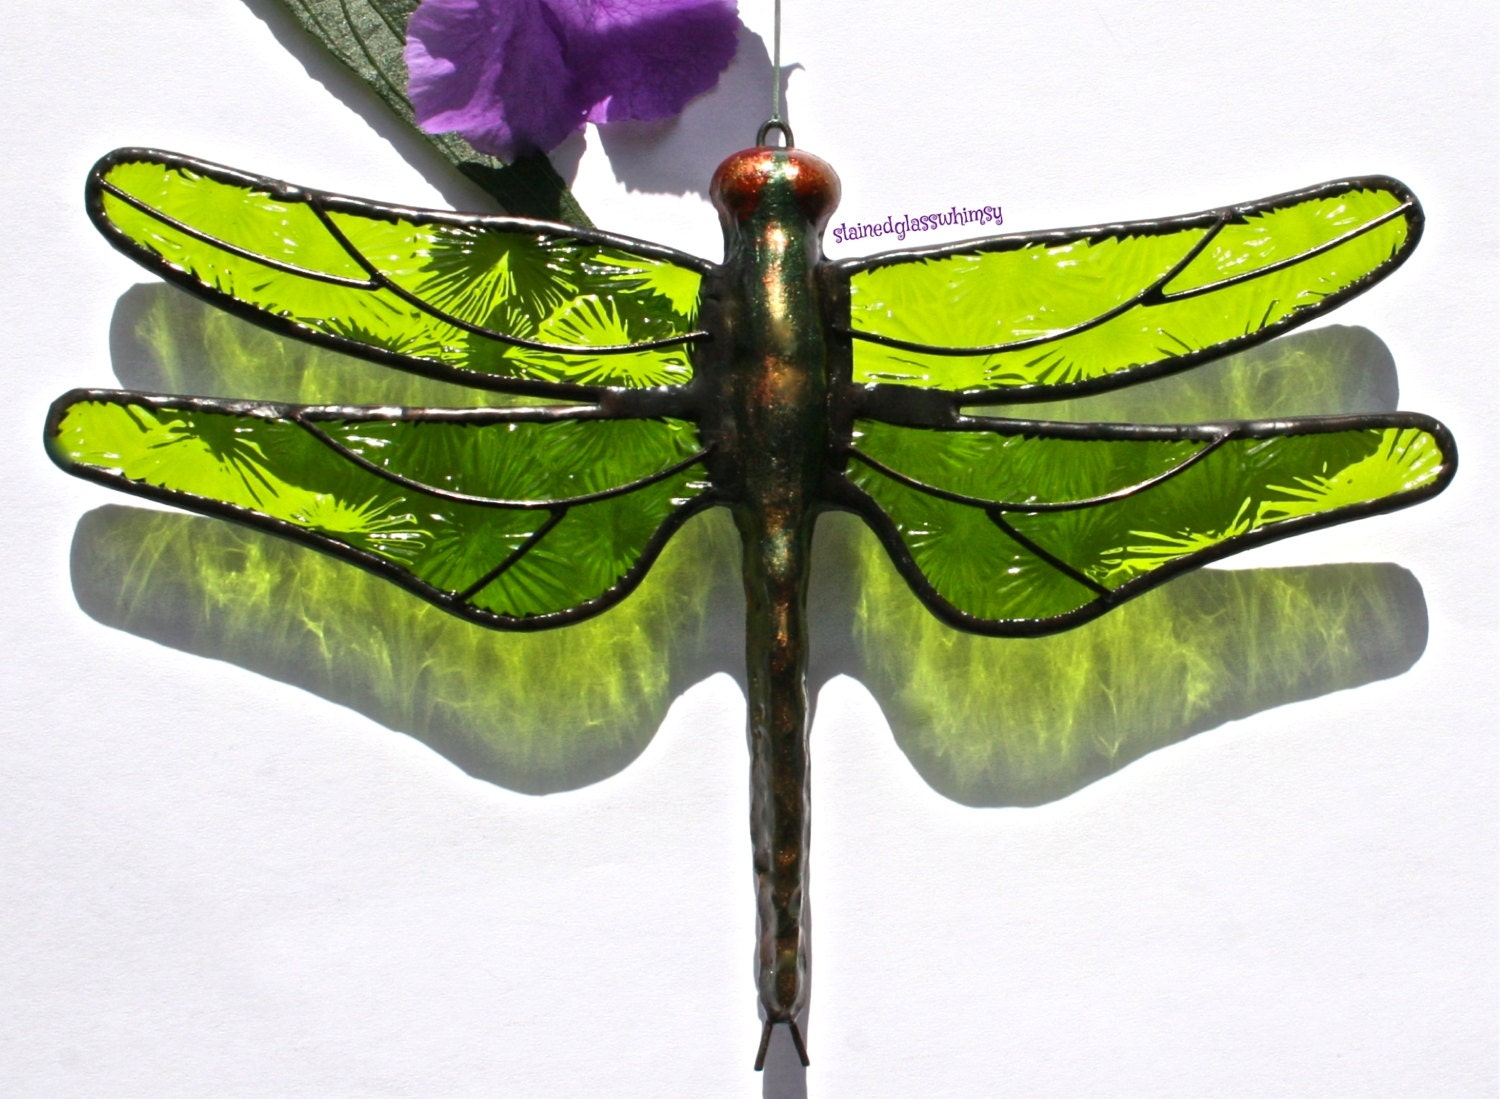 Stained Glass DRAGONFLY Suncatcher,  Spring / Lime Green Wings, Textured, Handcast Metal Body, USA Handmade - stainedglasswhimsy